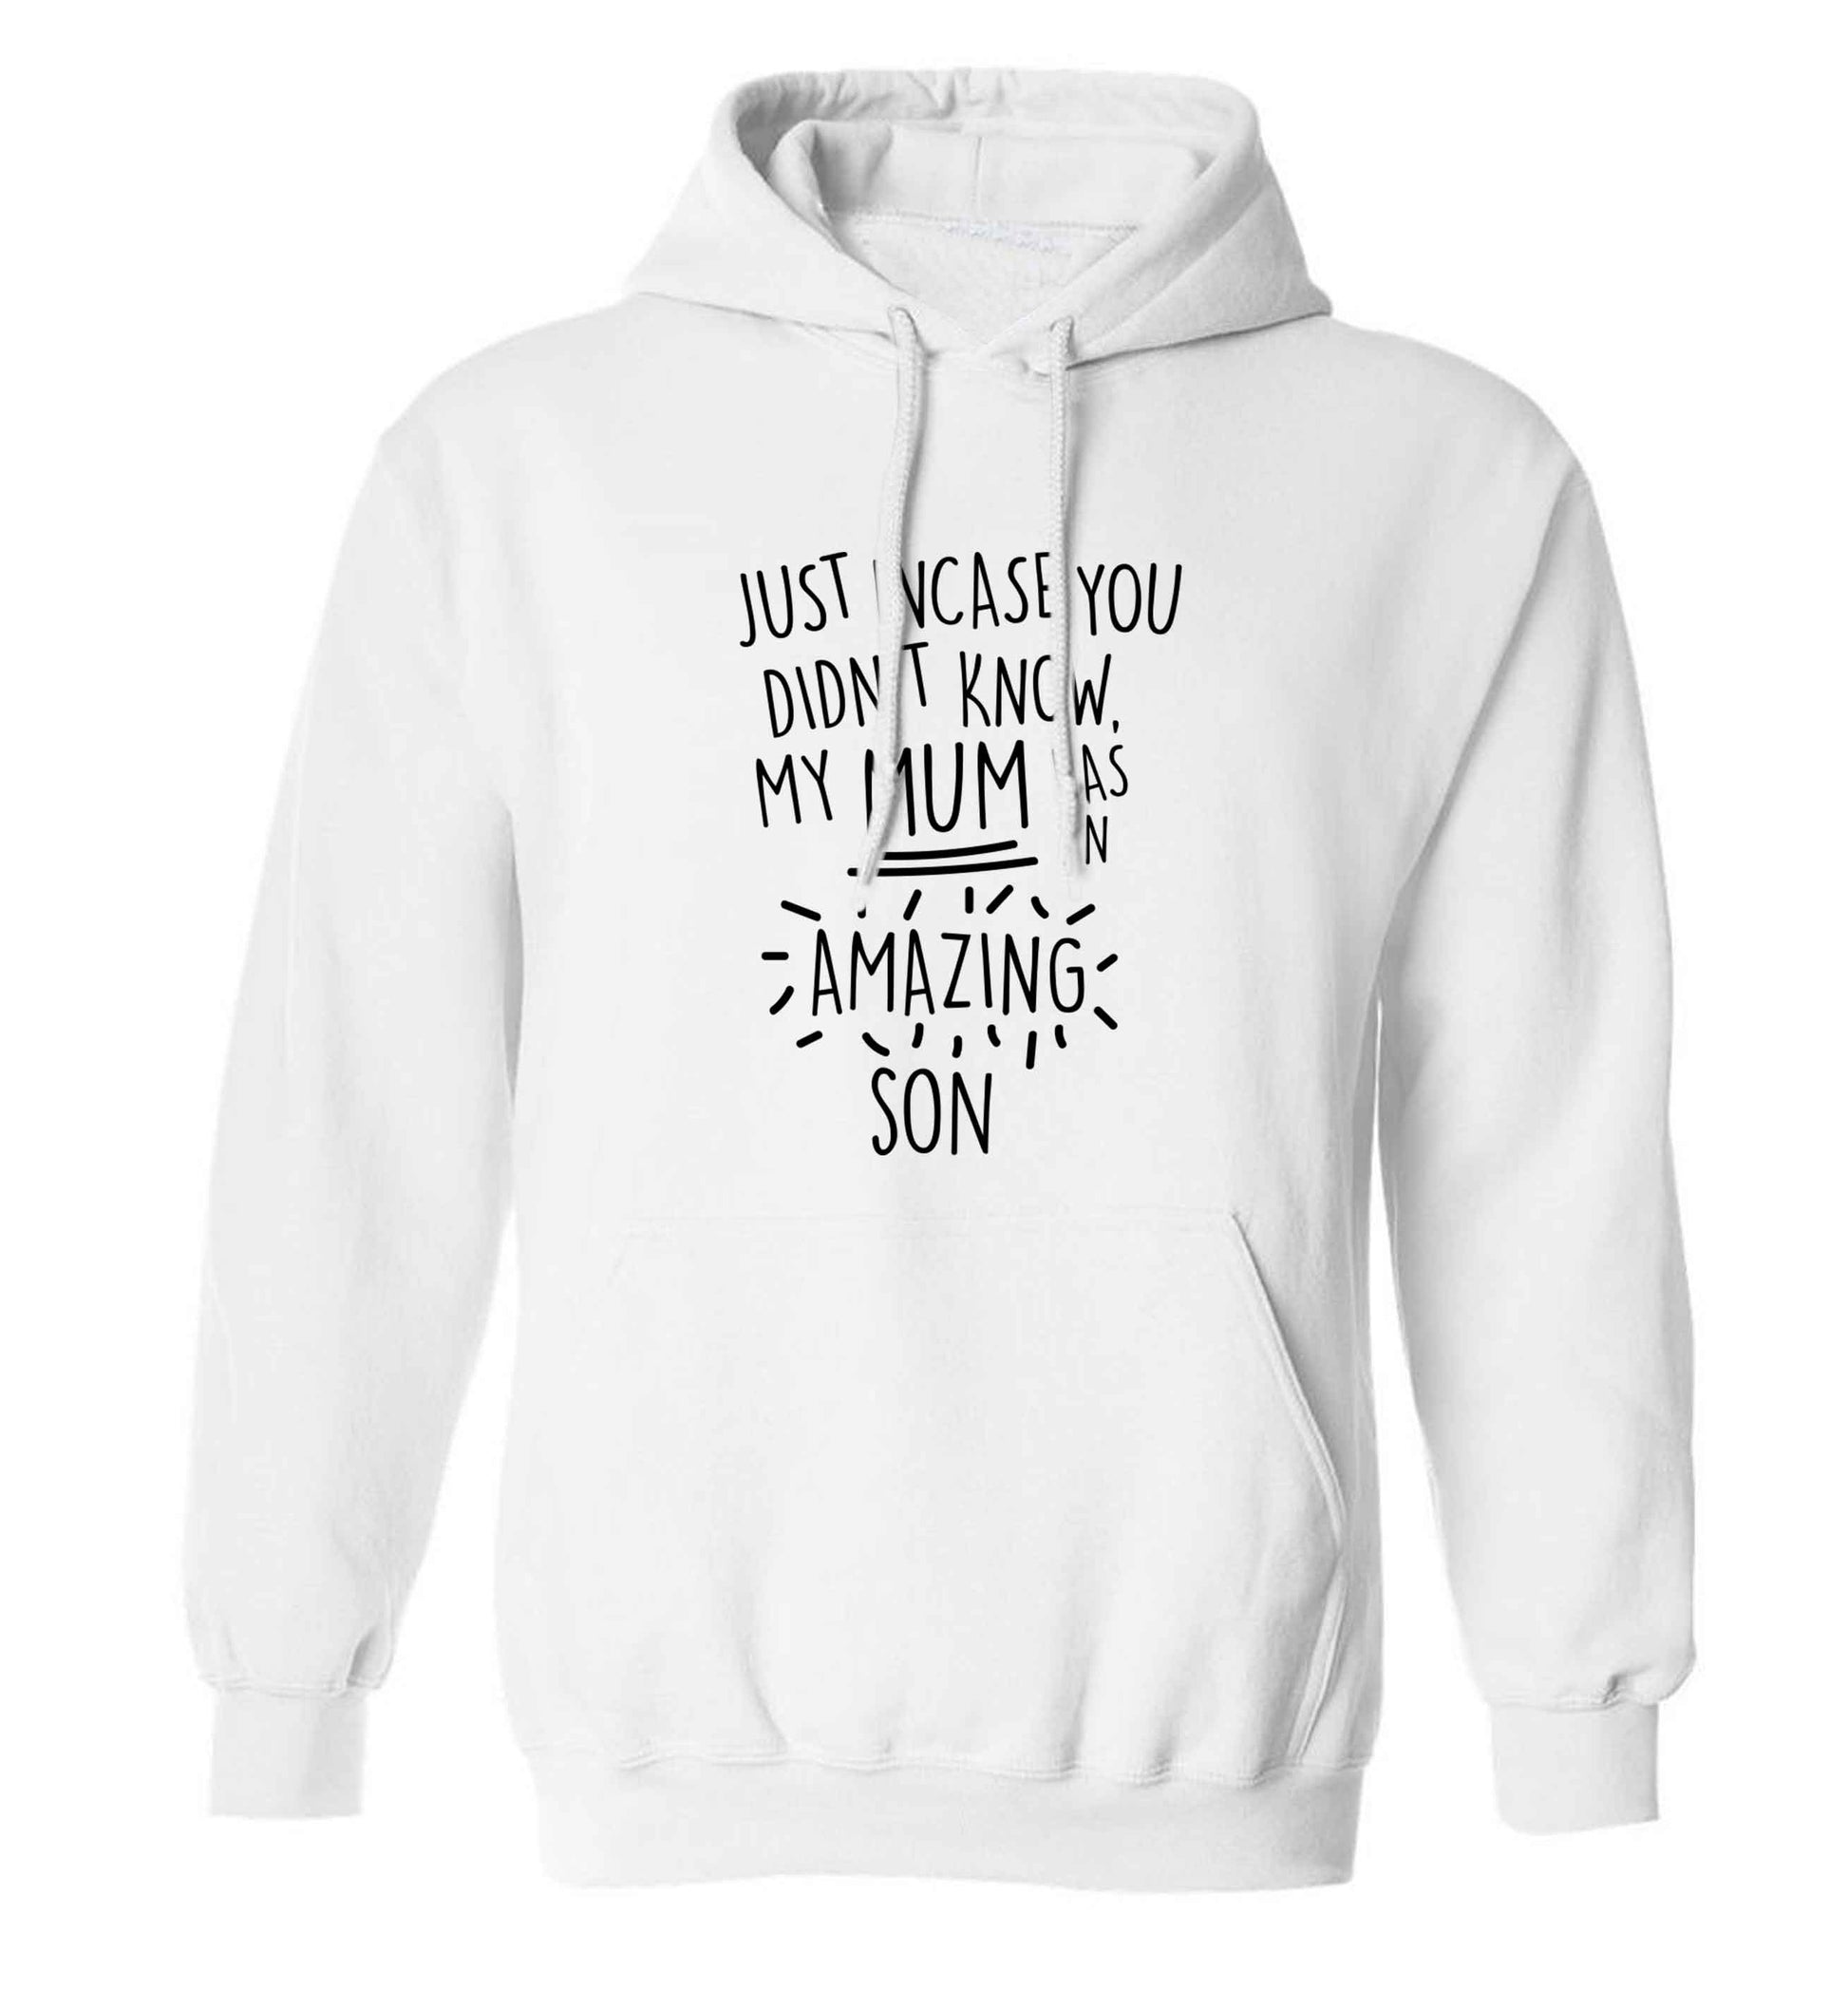 Just incase you didn't know my mum has an amazing son adults unisex white hoodie 2XL